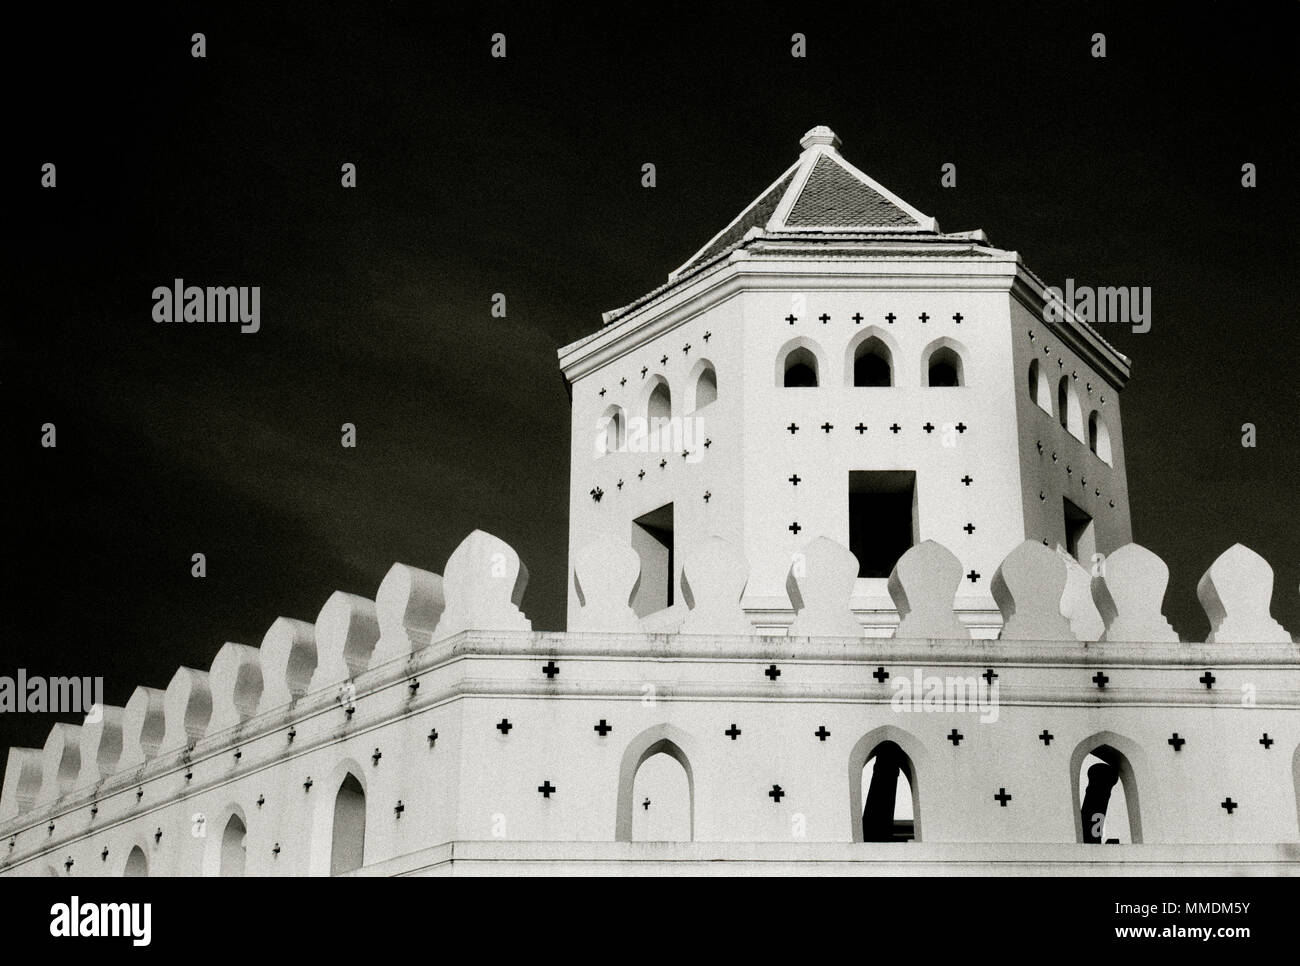 Phra Sumen Fort in Bangkok in Thailand in Southeast Asia Far East. History Architecture Building Travel B&W Stock Photo